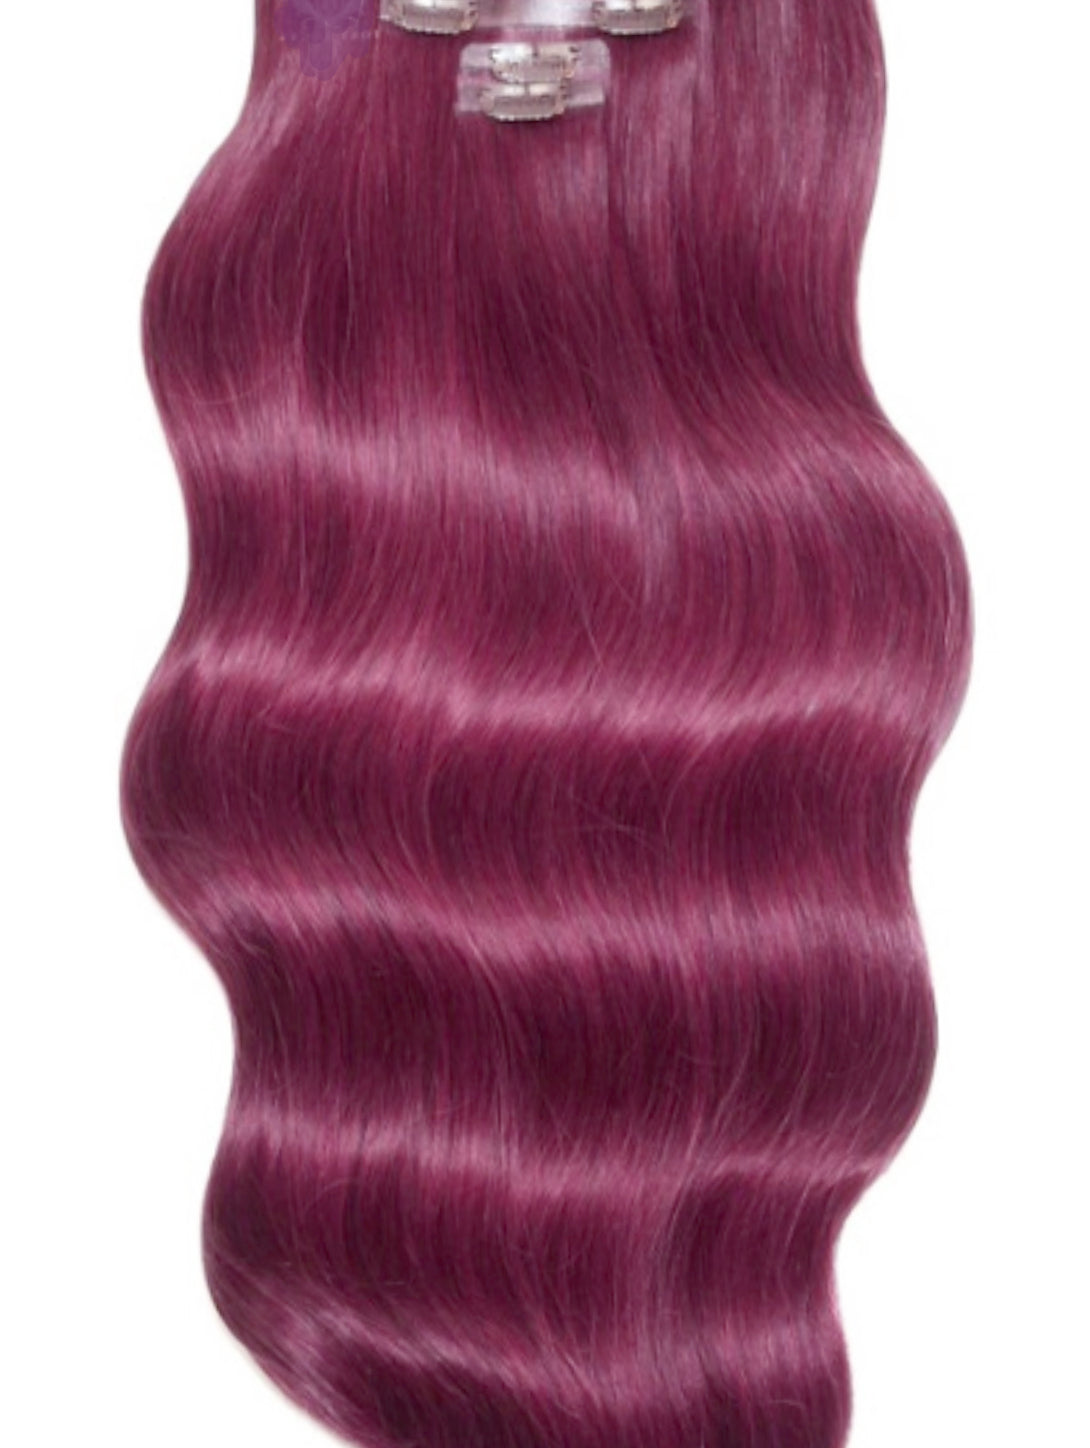 #99bb bright burgundy extra thick clip in hair extensions 